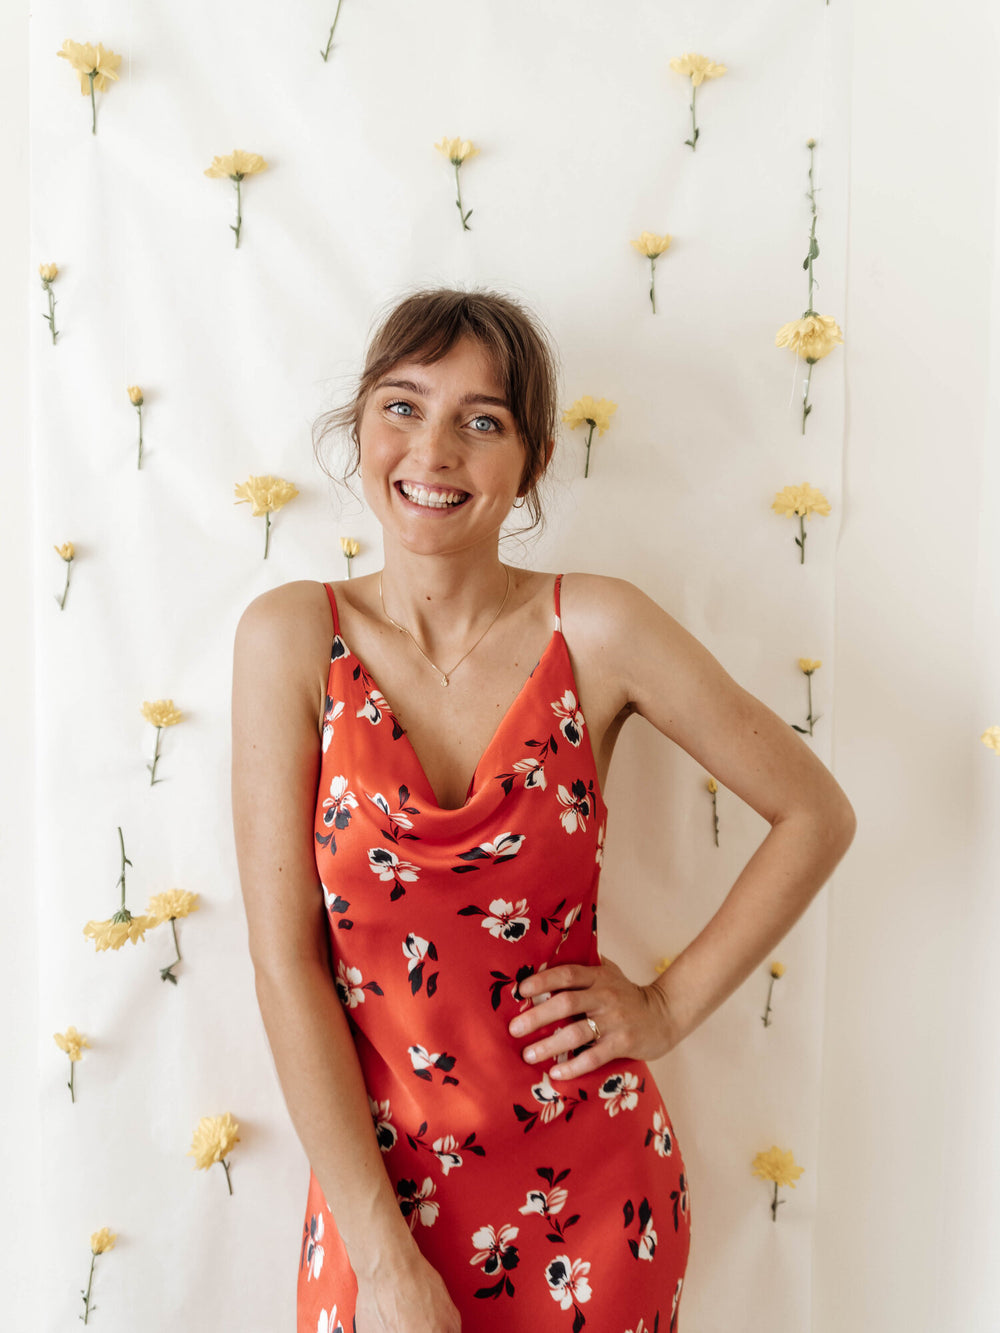 Woman wearing the Sicily Slip Dress sewing pattern from Sewing Patterns by Masin on The Fold Line. A sleeveless, slip dress pattern made in satins, lightweight crepes, rayon/viscose, chiffon or charmeuse fabrics, featuring a bias cut, narrow shoulder stra